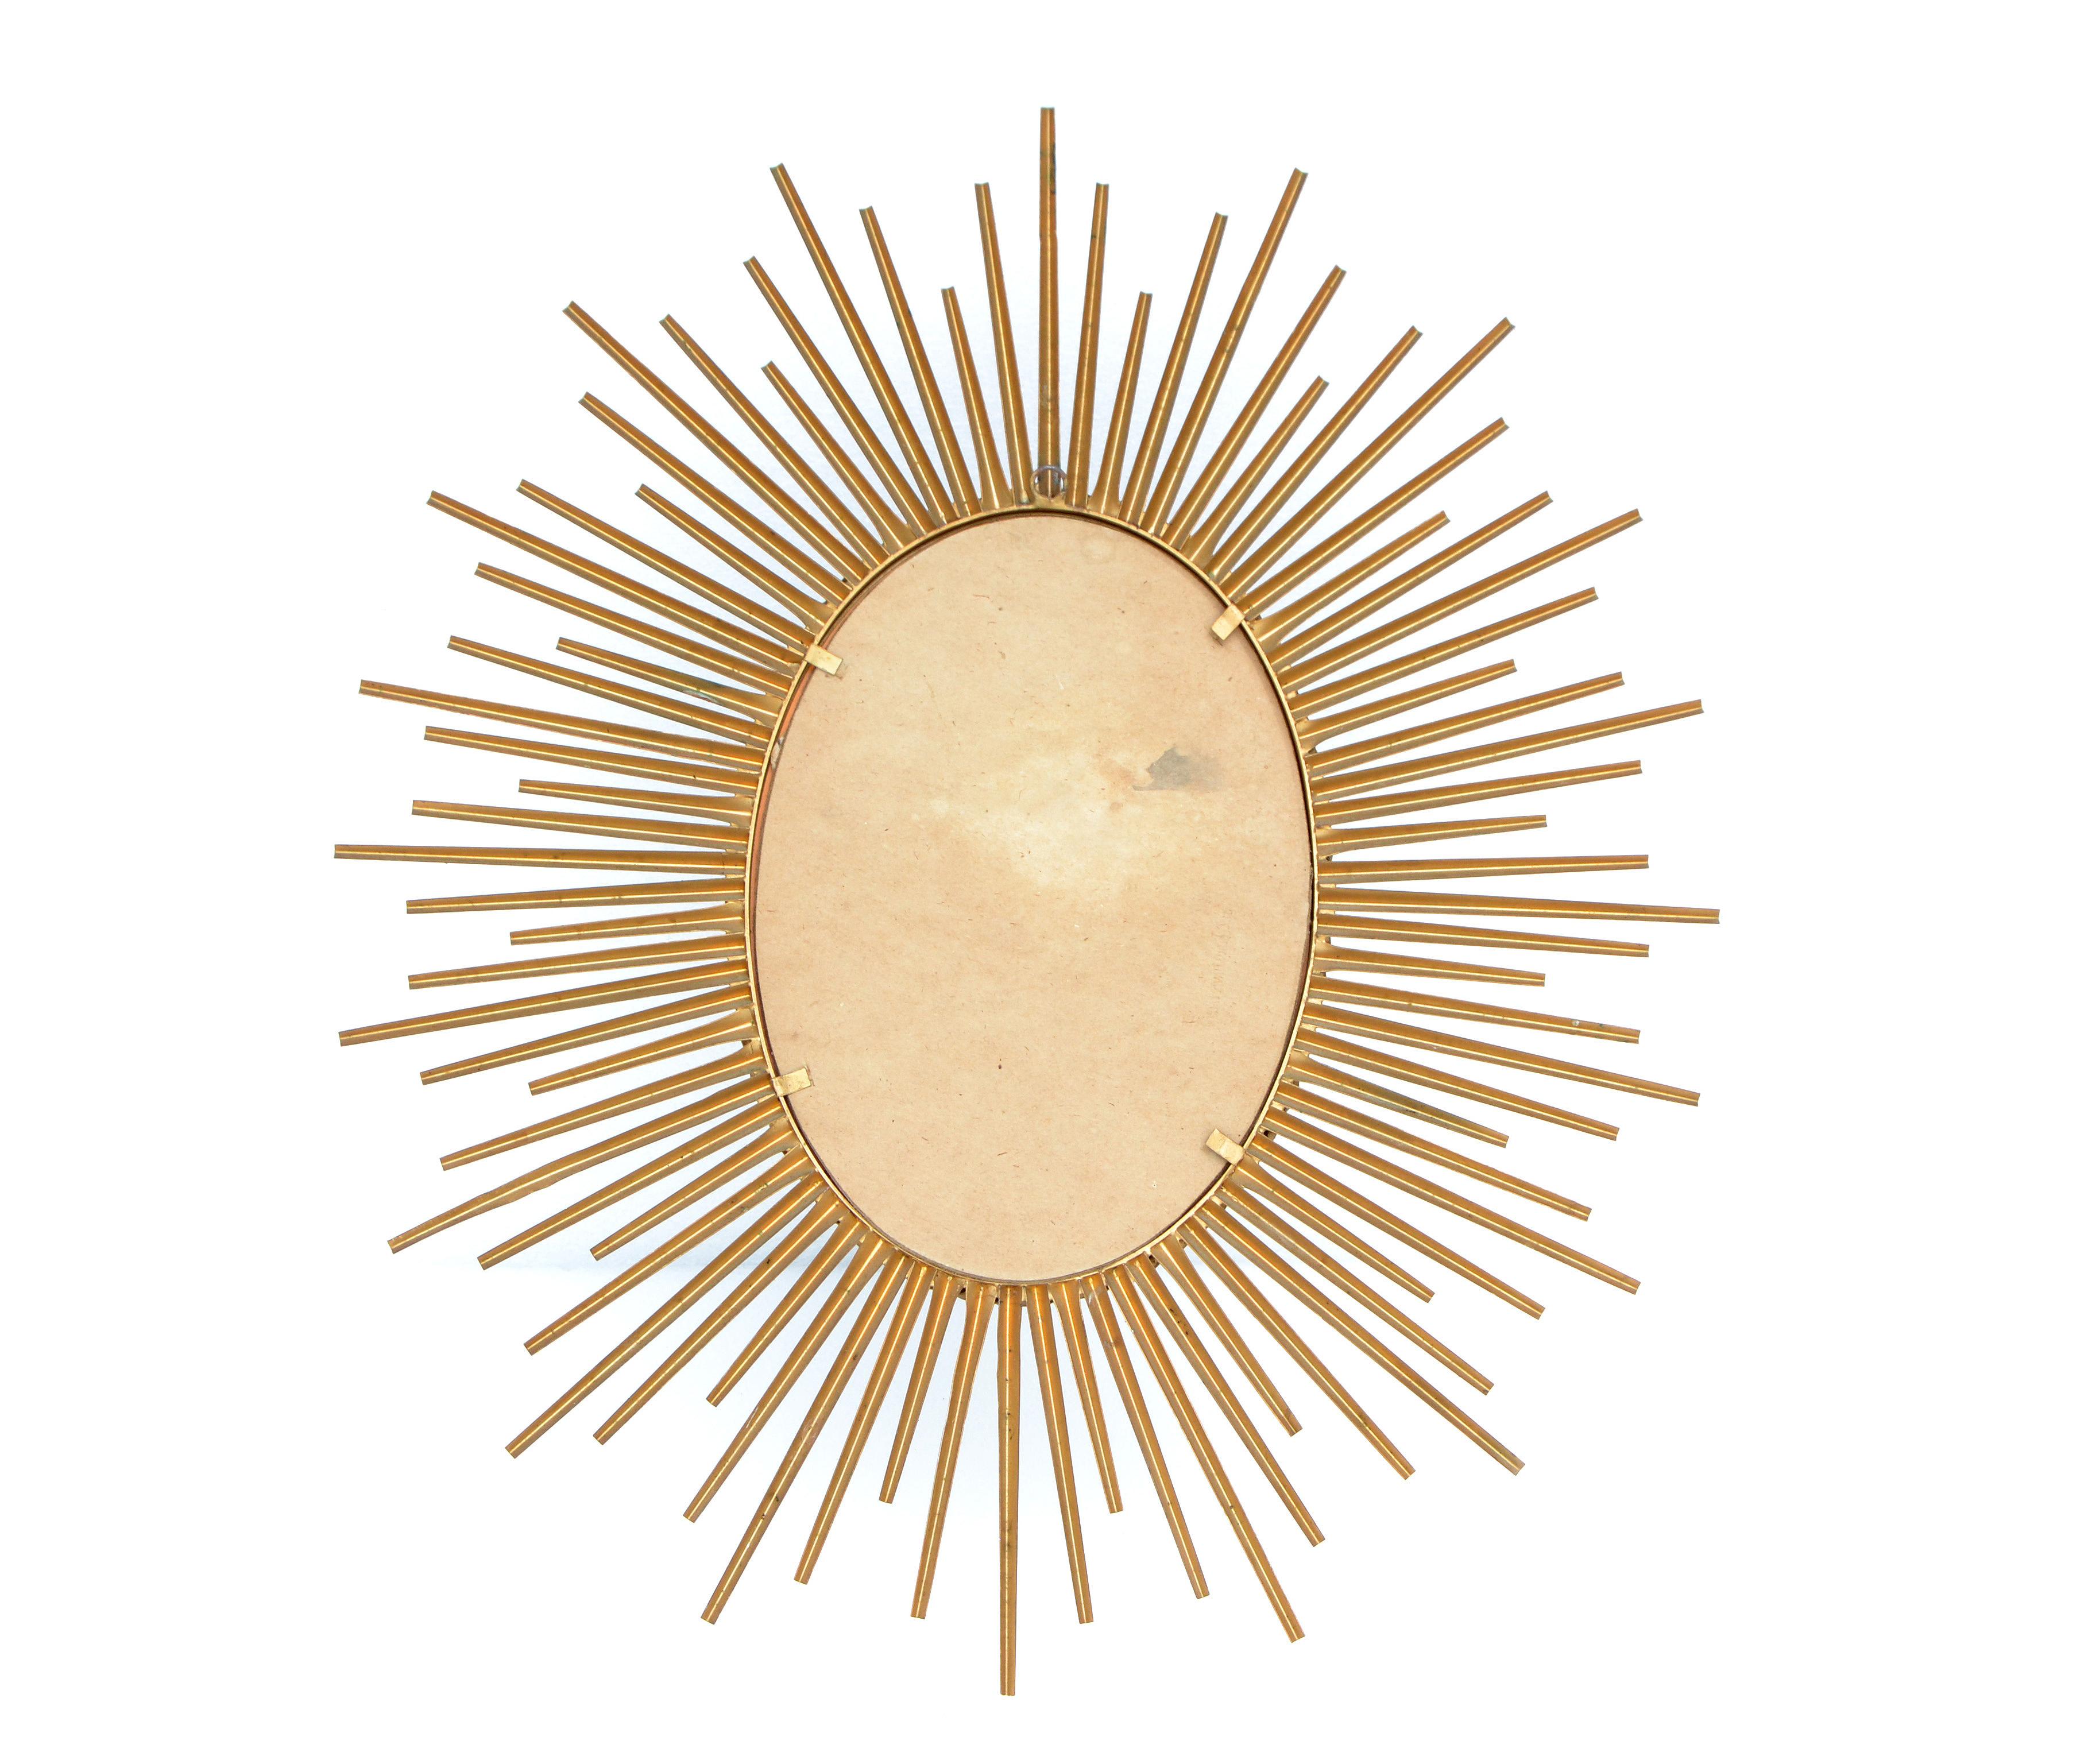 Chaty Vallauris Oval Metal Sunburst Wall Mirror Gold Finish France, 1970 For Sale 4